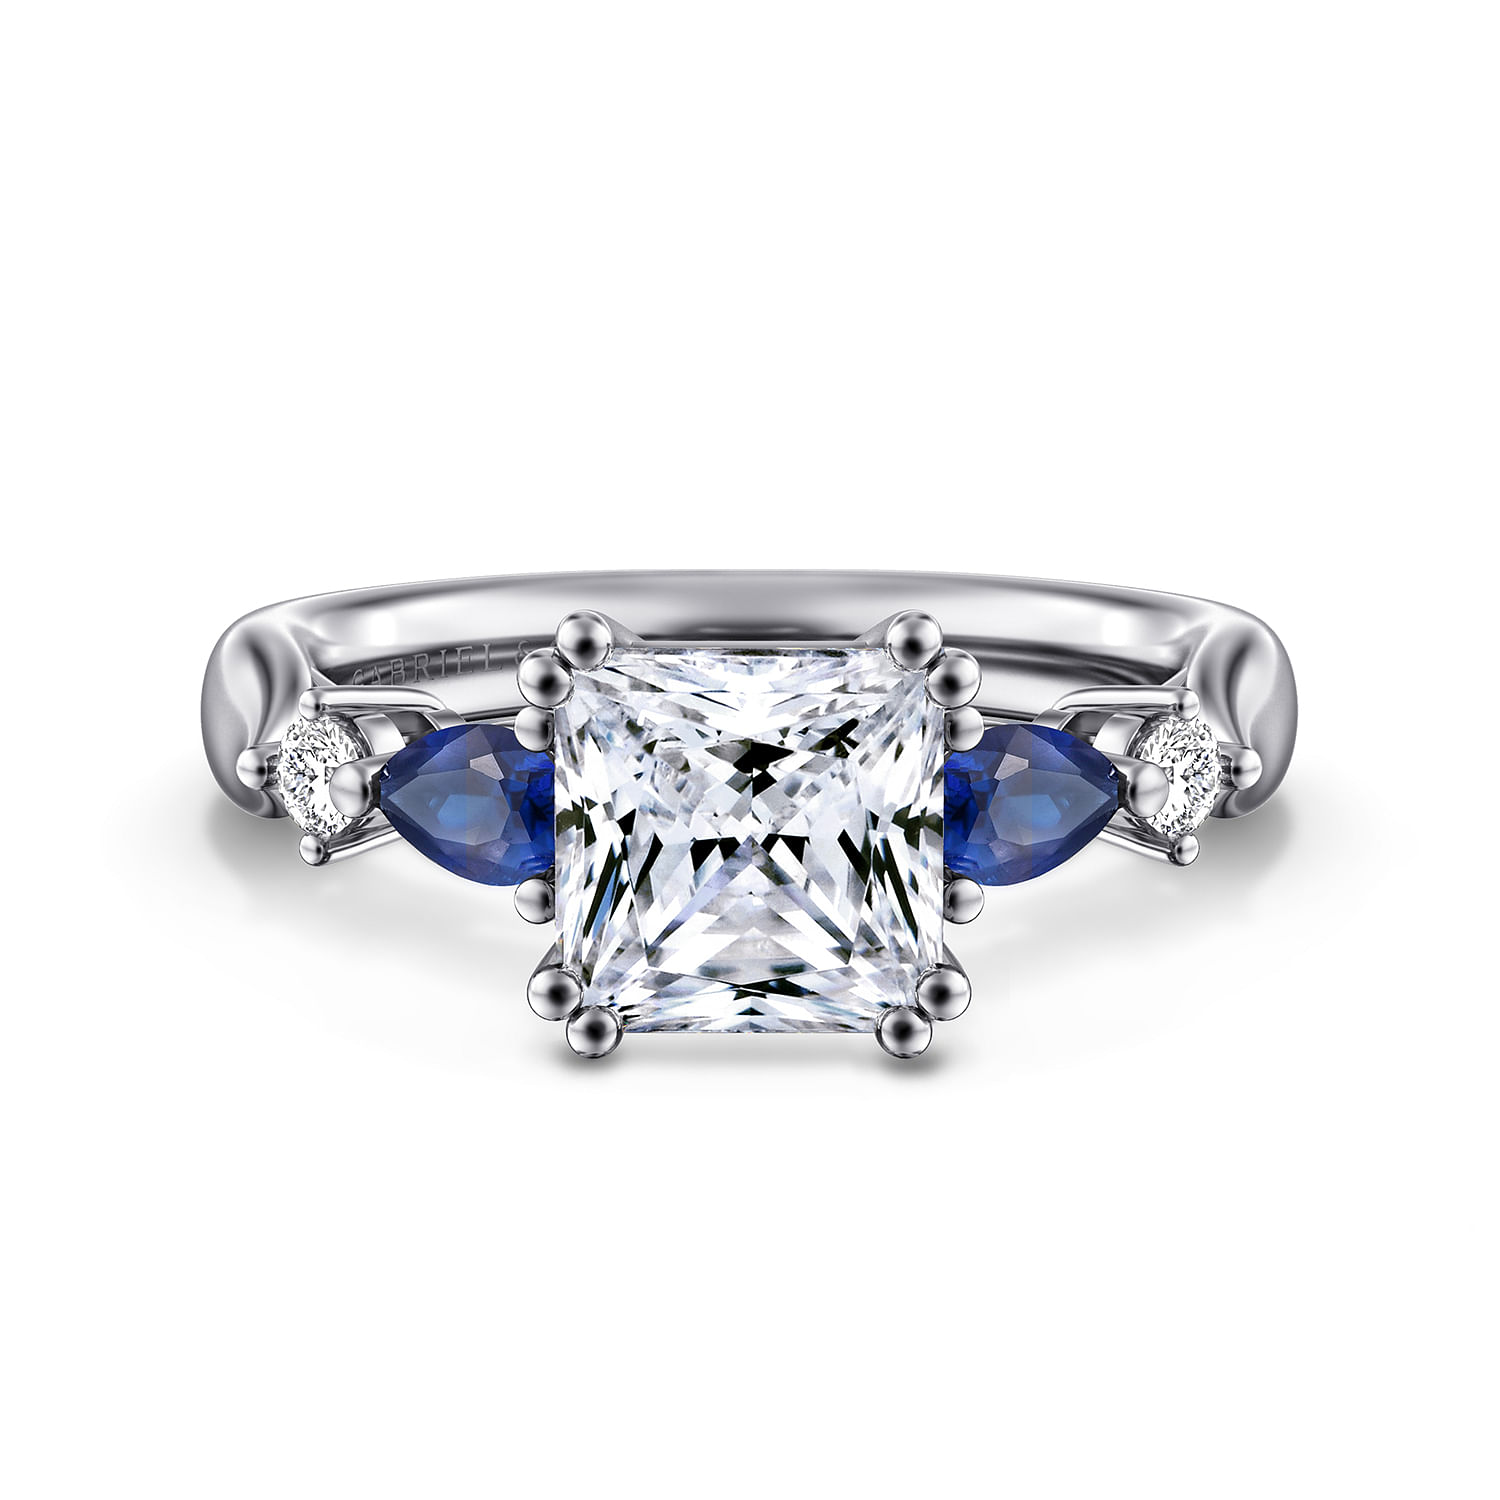 Carrie---14K-White-Gold-Princess-Cut-Five-Stone-Sapphire-and-Diamond-Engagement-Ring1